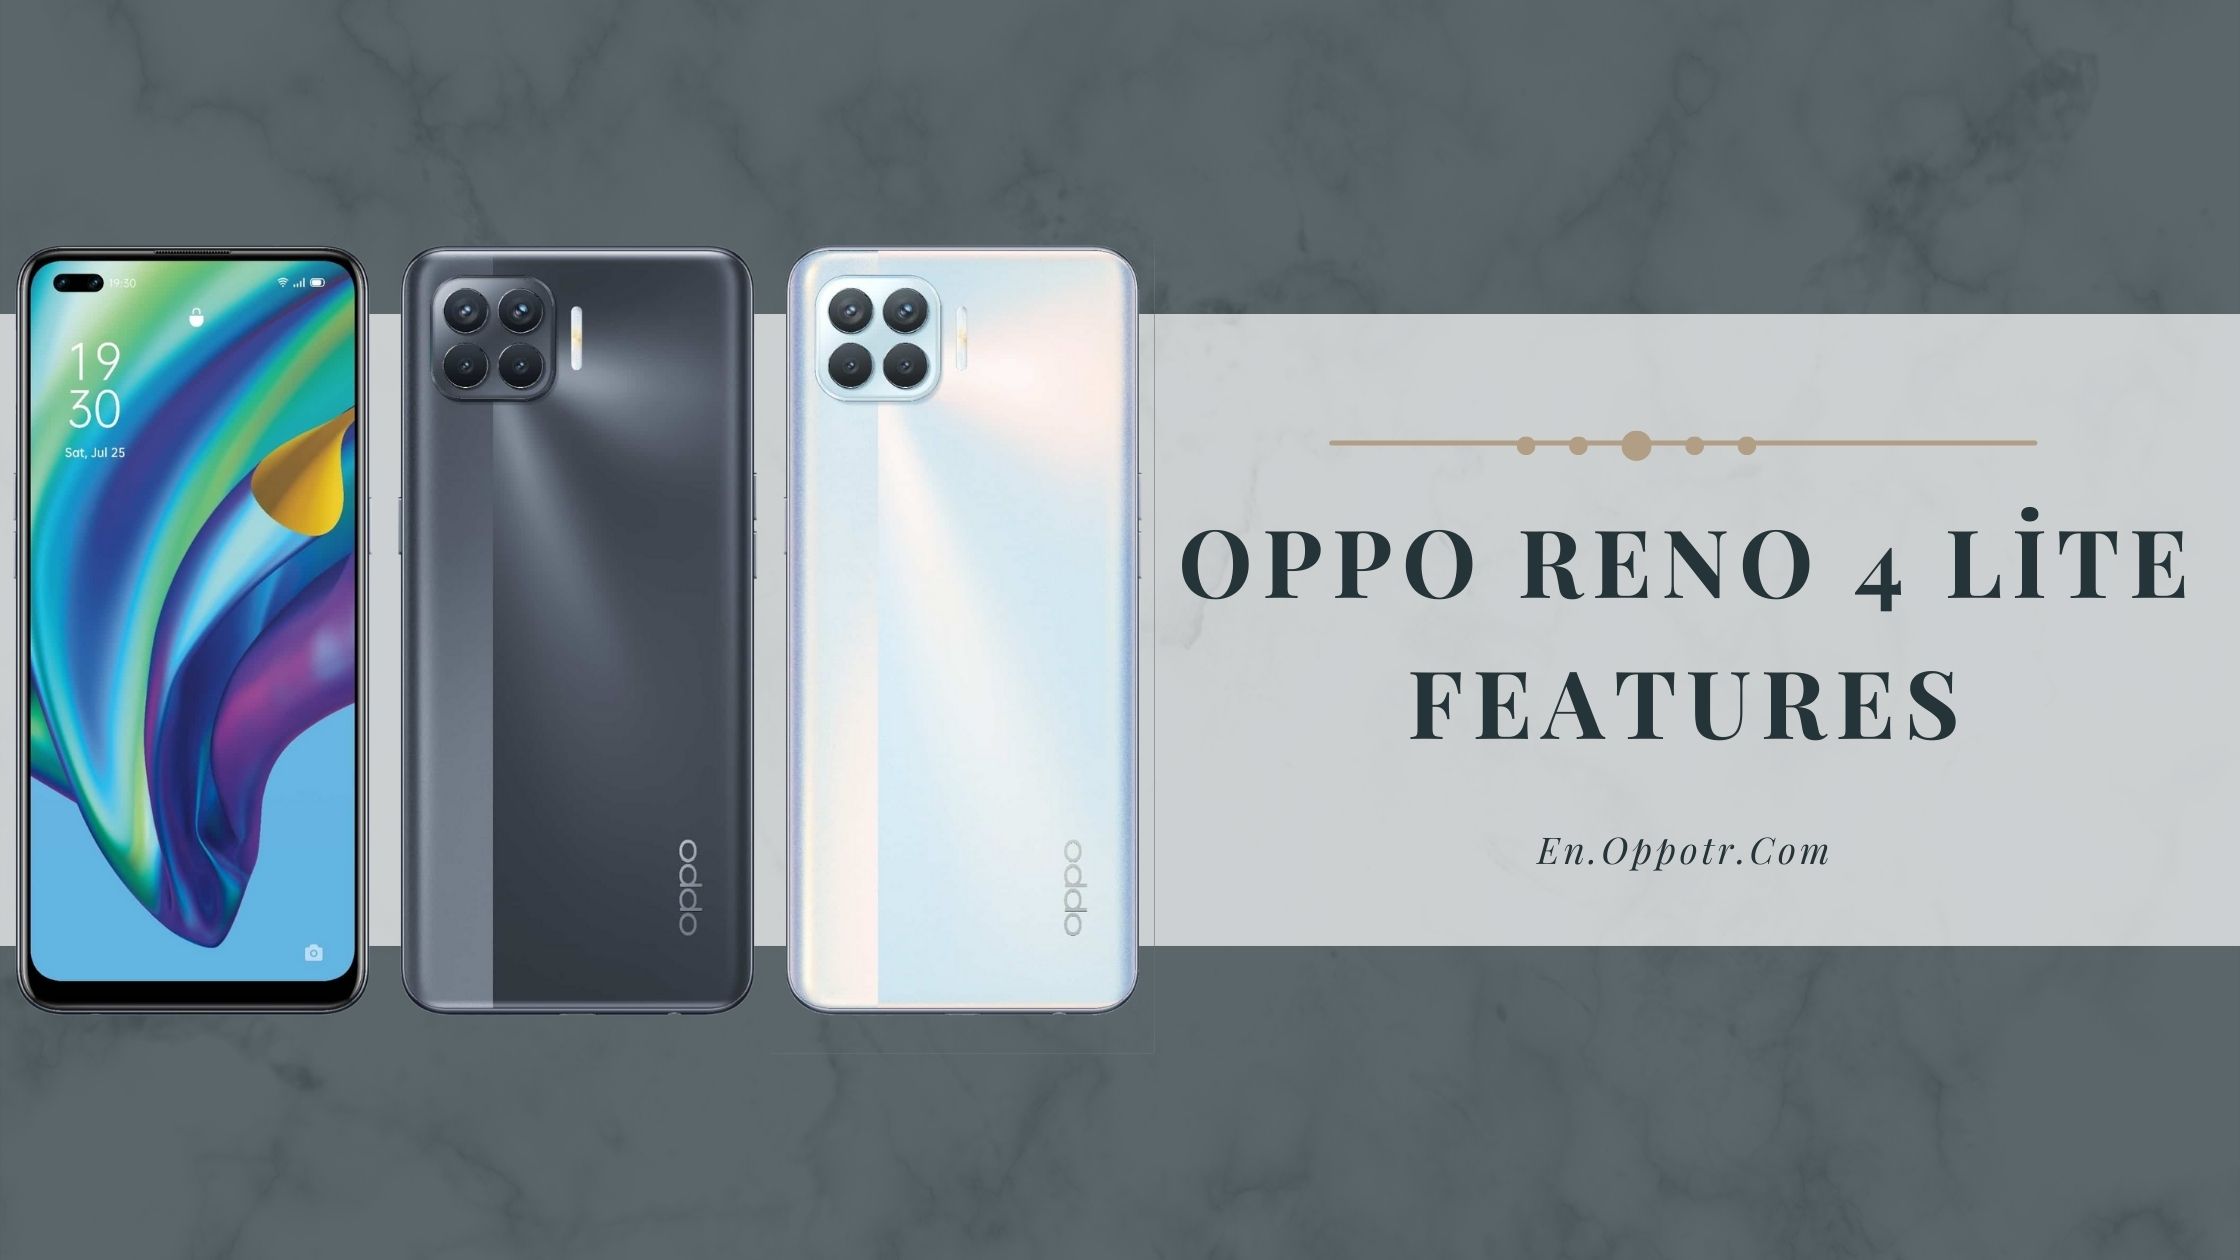 Oppo Reno 4 Lite Features: A Mid-Range Phone with Impressive Features